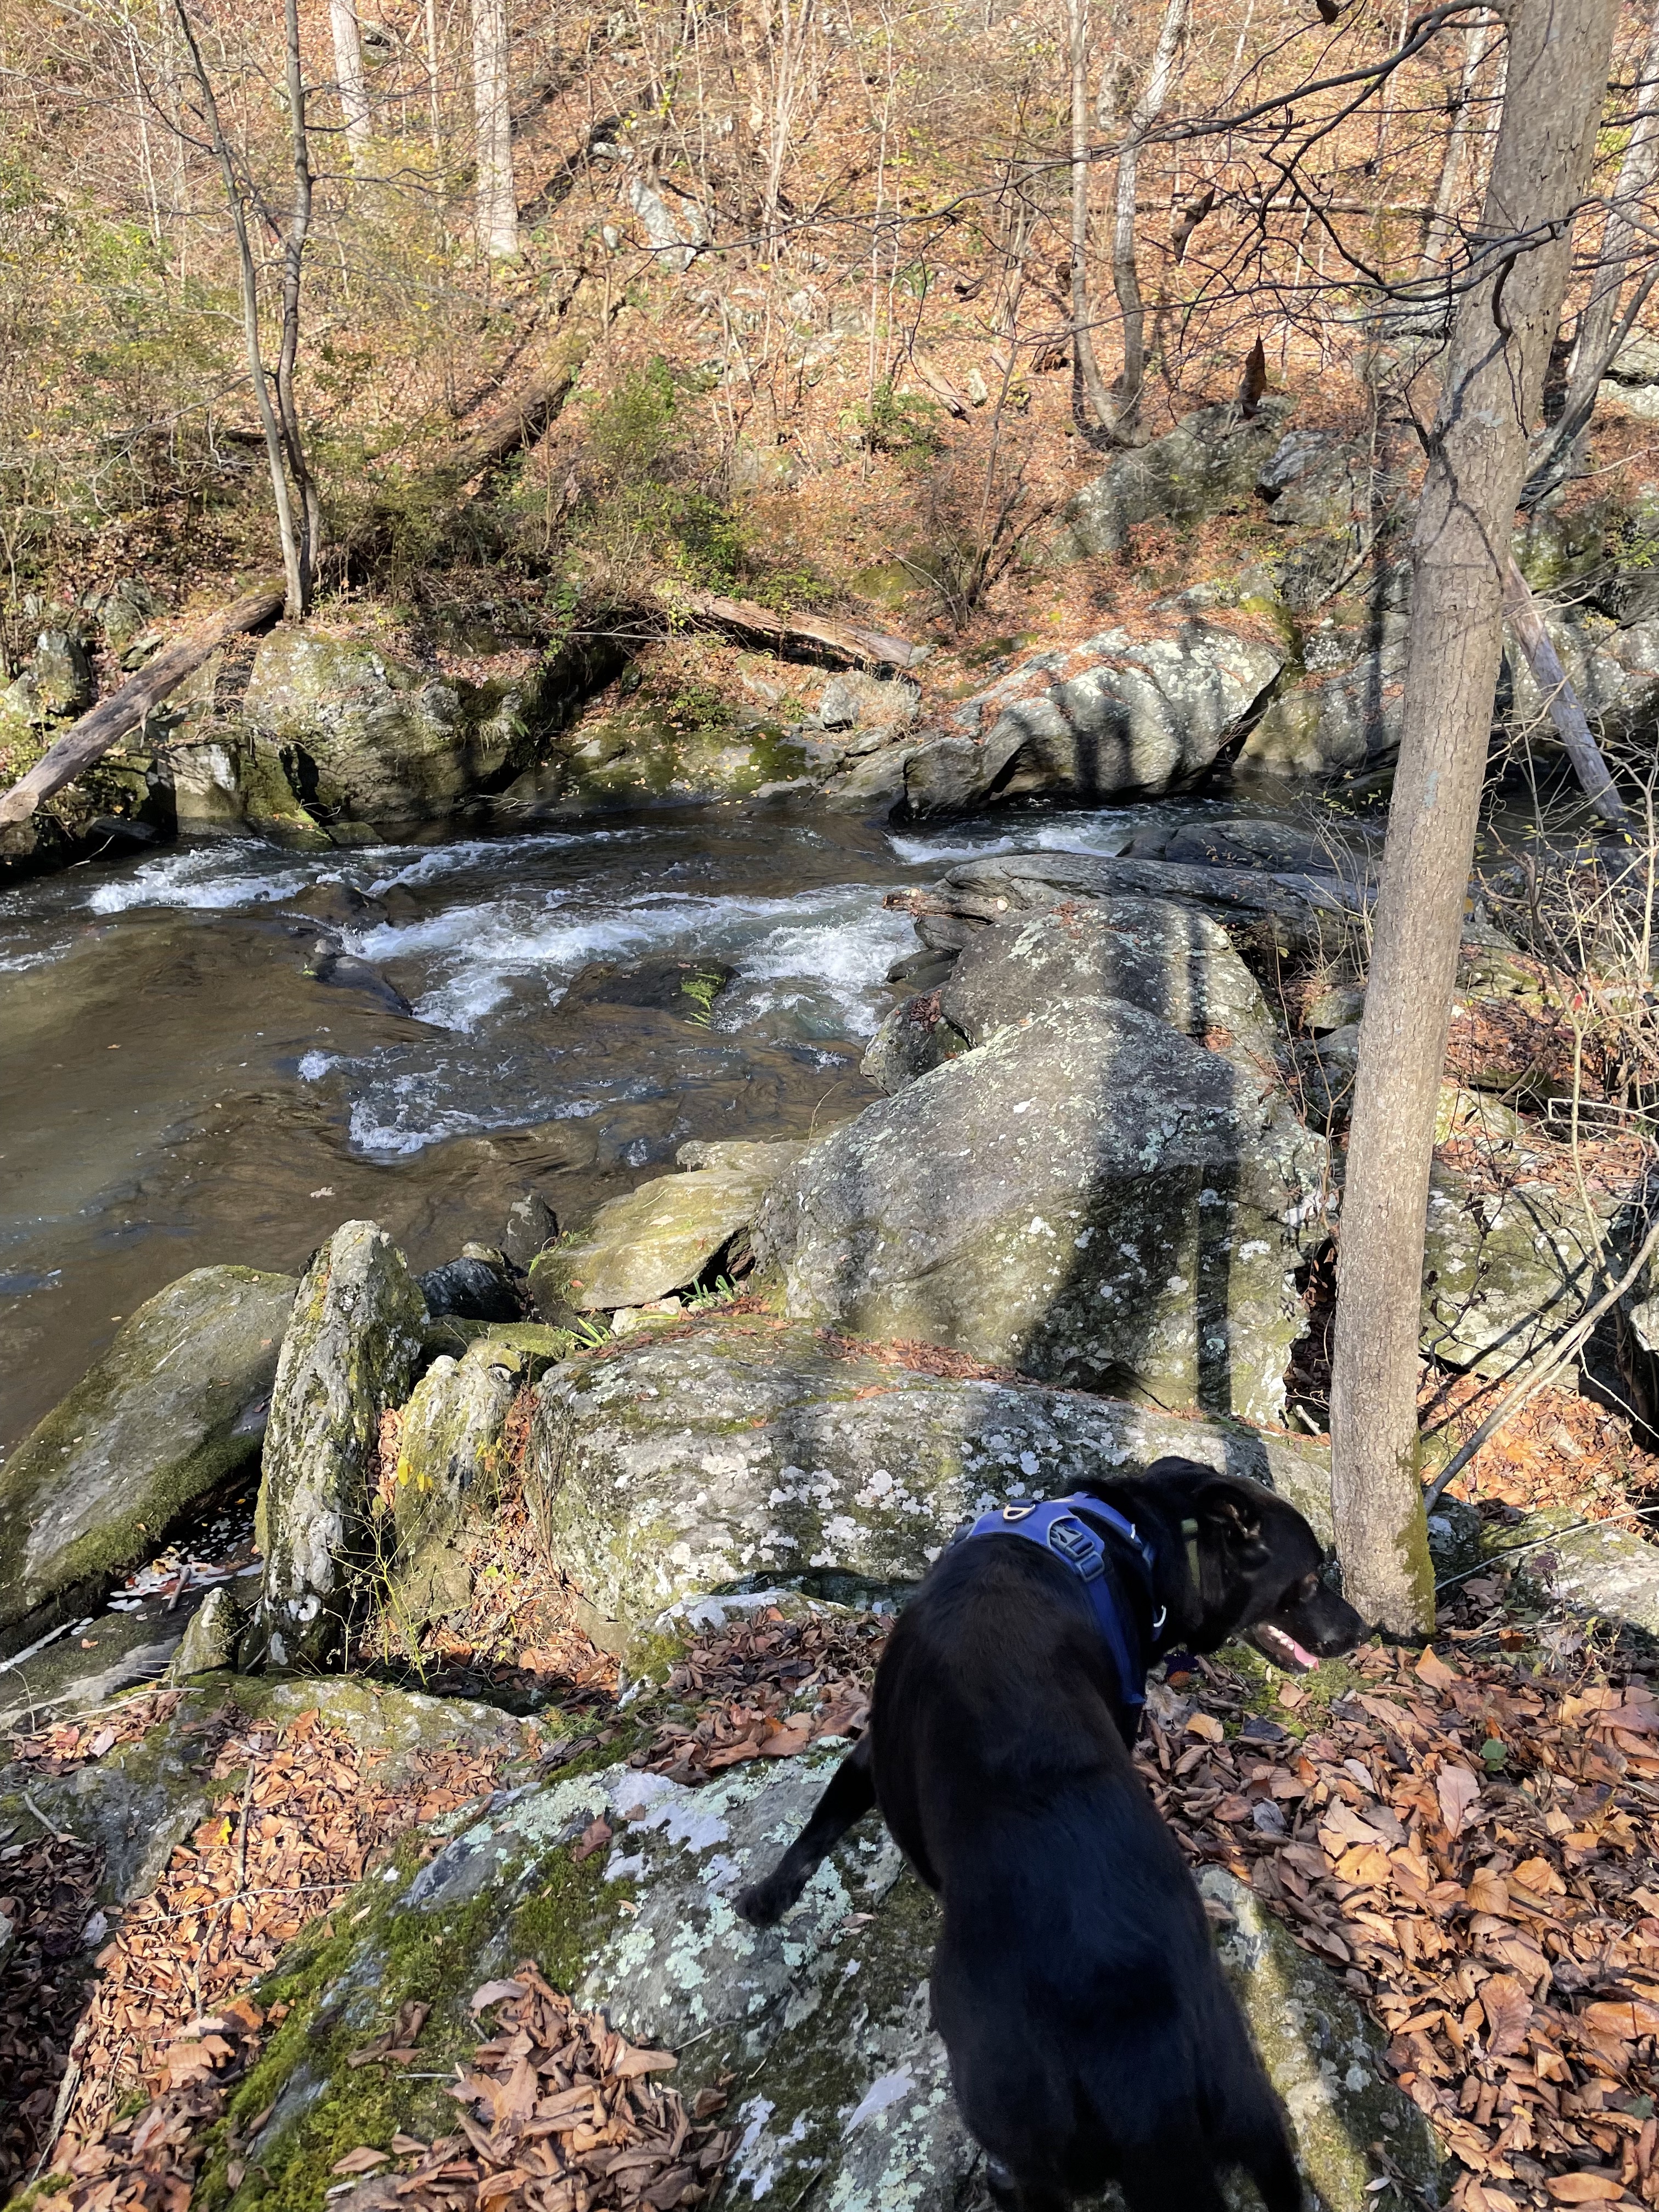 Black dog over looking a river with fallen leaves in Gun Powder Falls state park